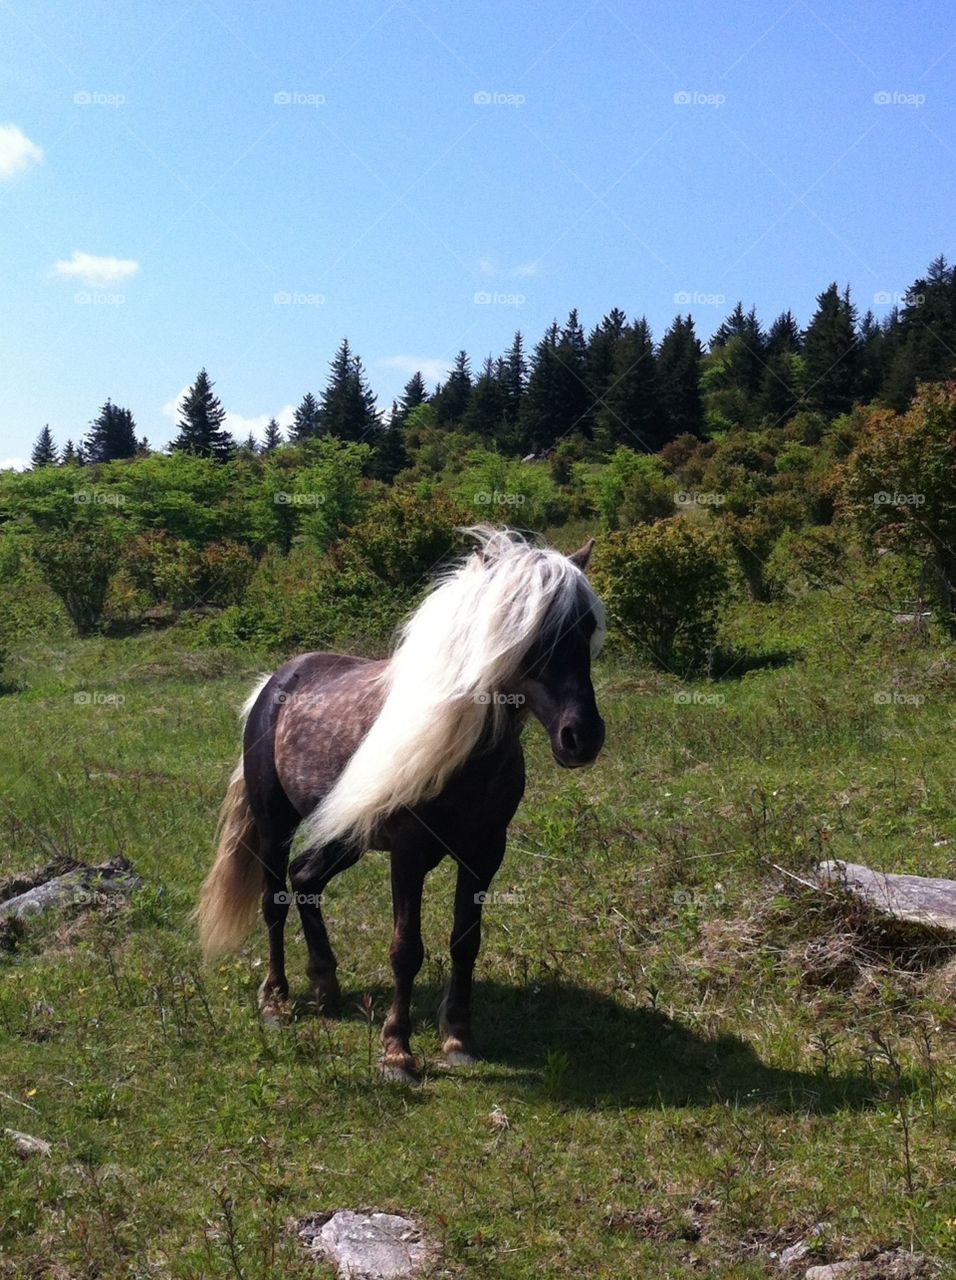 Grayson Highlands Fabio. Taken at Grayson Highlands State Park. The "wild" ponies are adorable and remarkably friendly. Fabio is the leader.